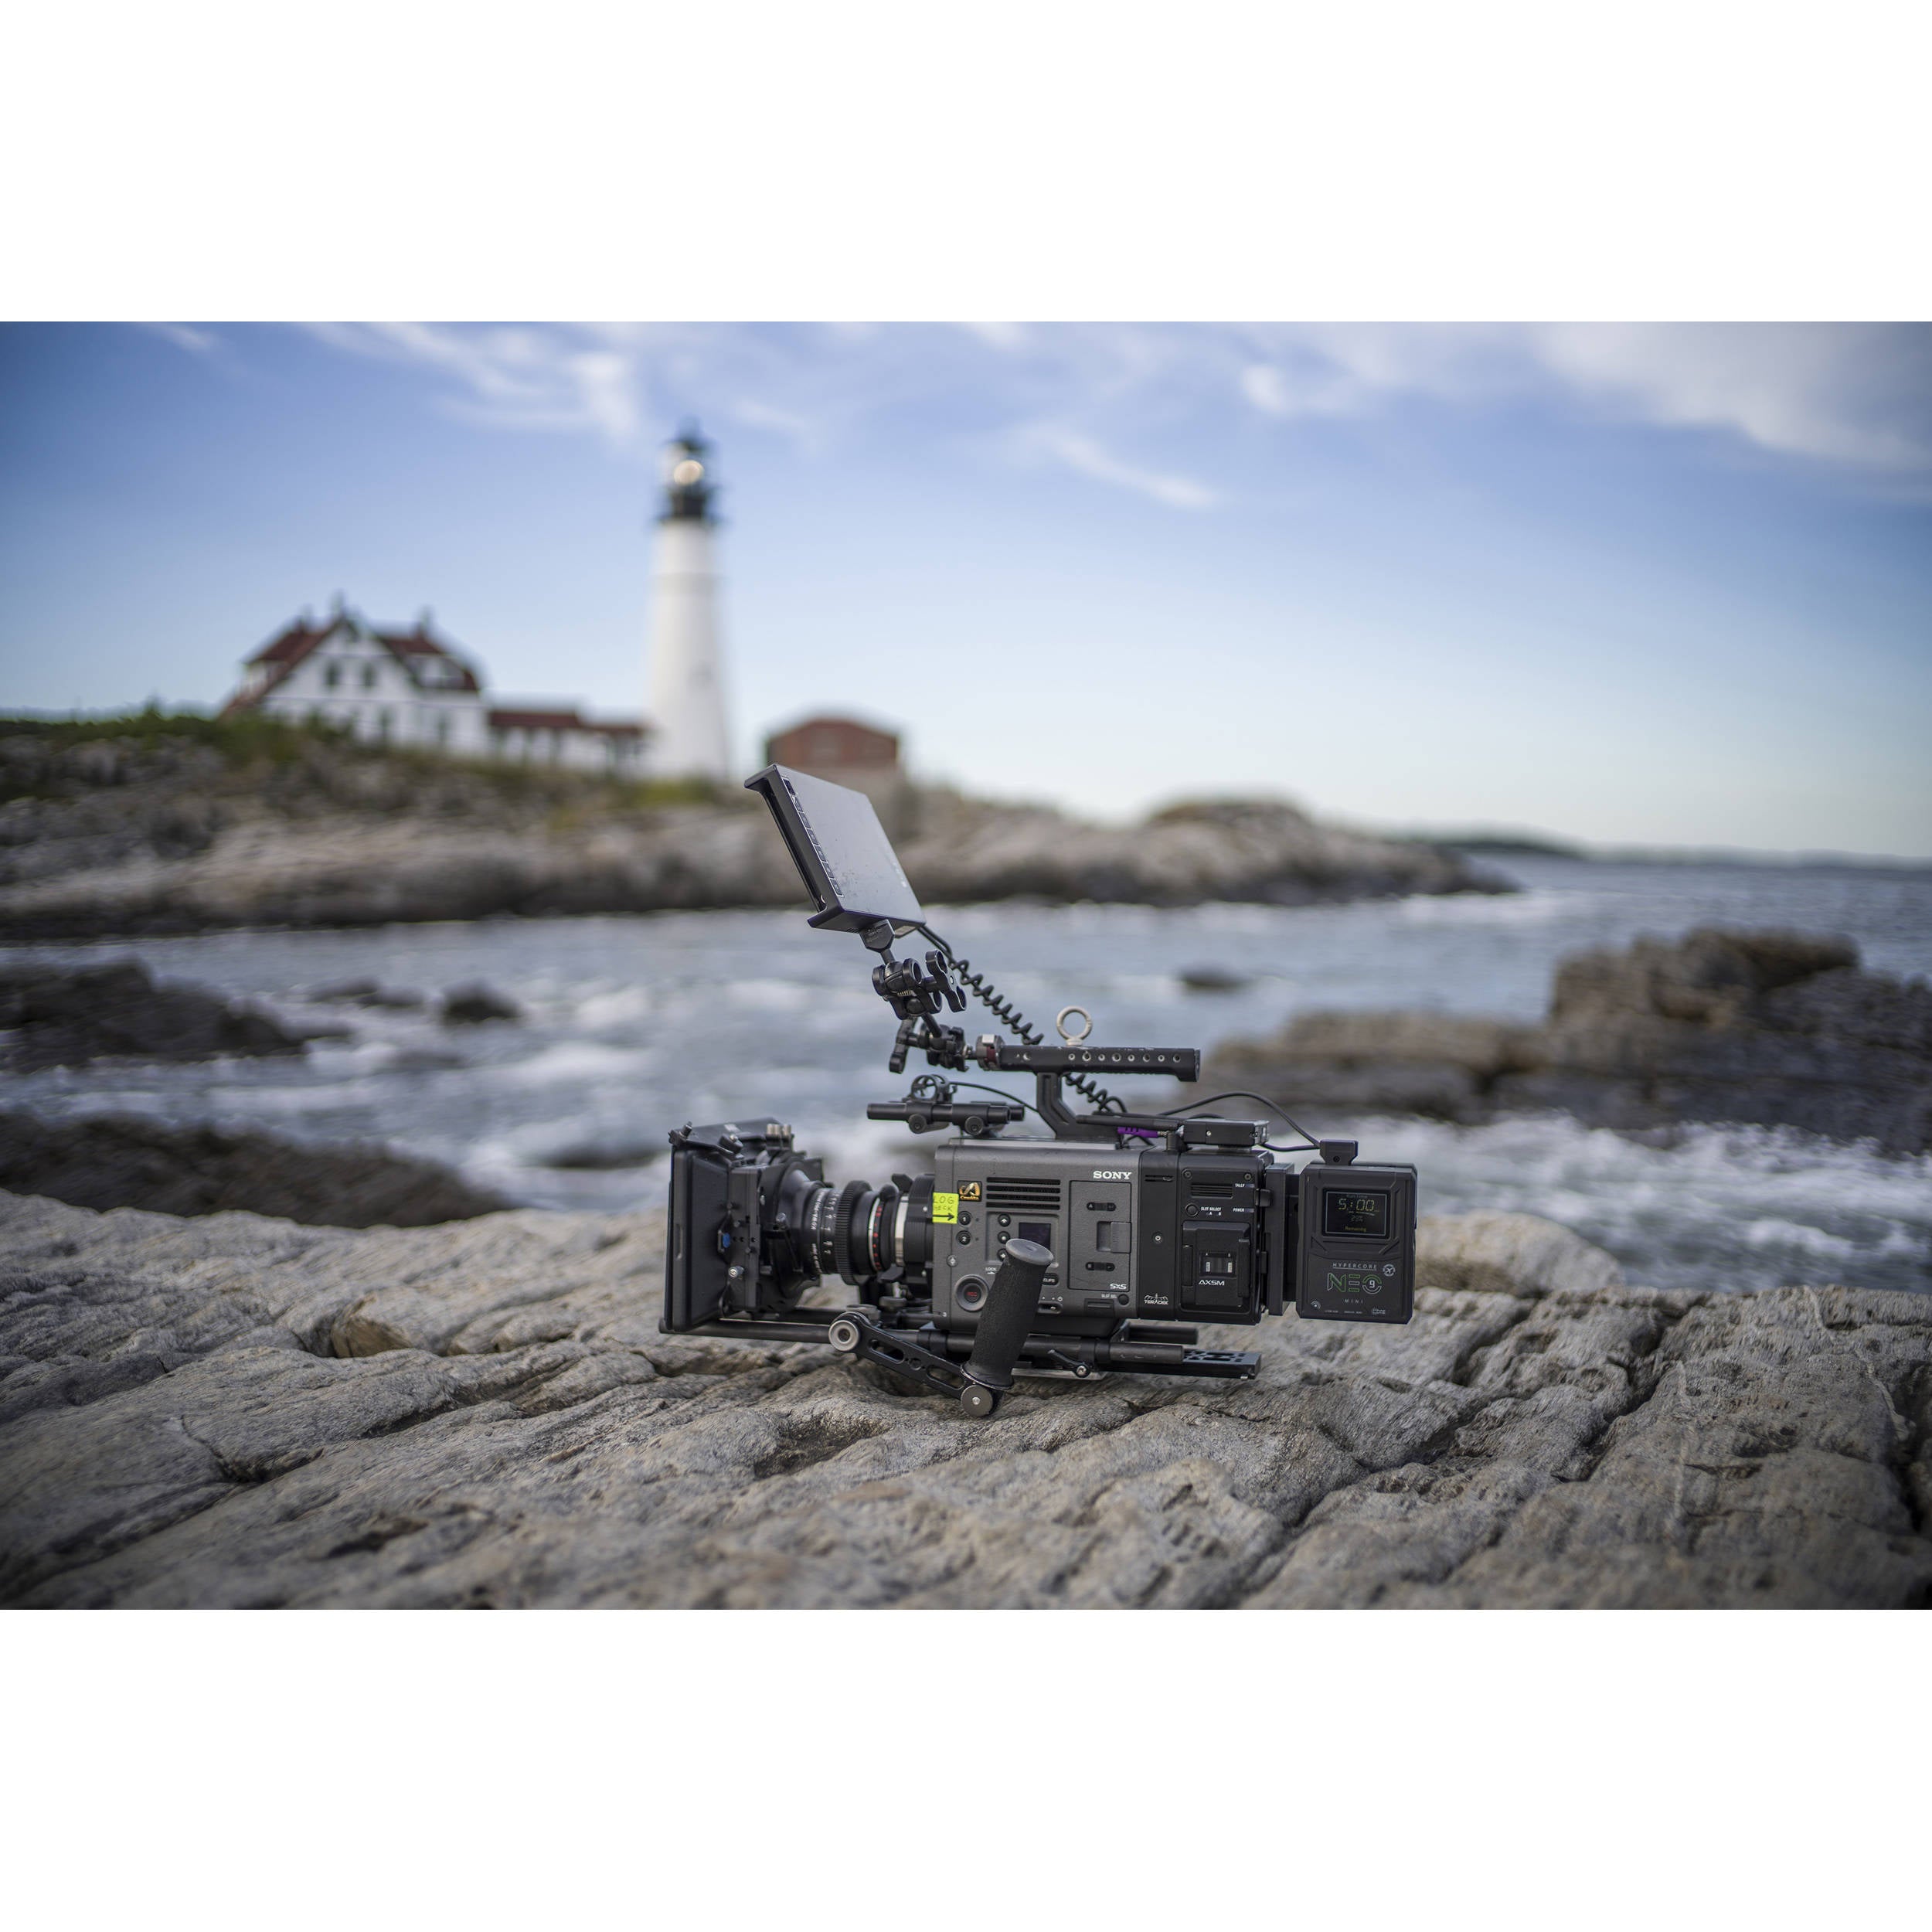 Core SWX Hypercore NEO 9 Mini 98Wh Lithium-Ion Battery (V-Mount)